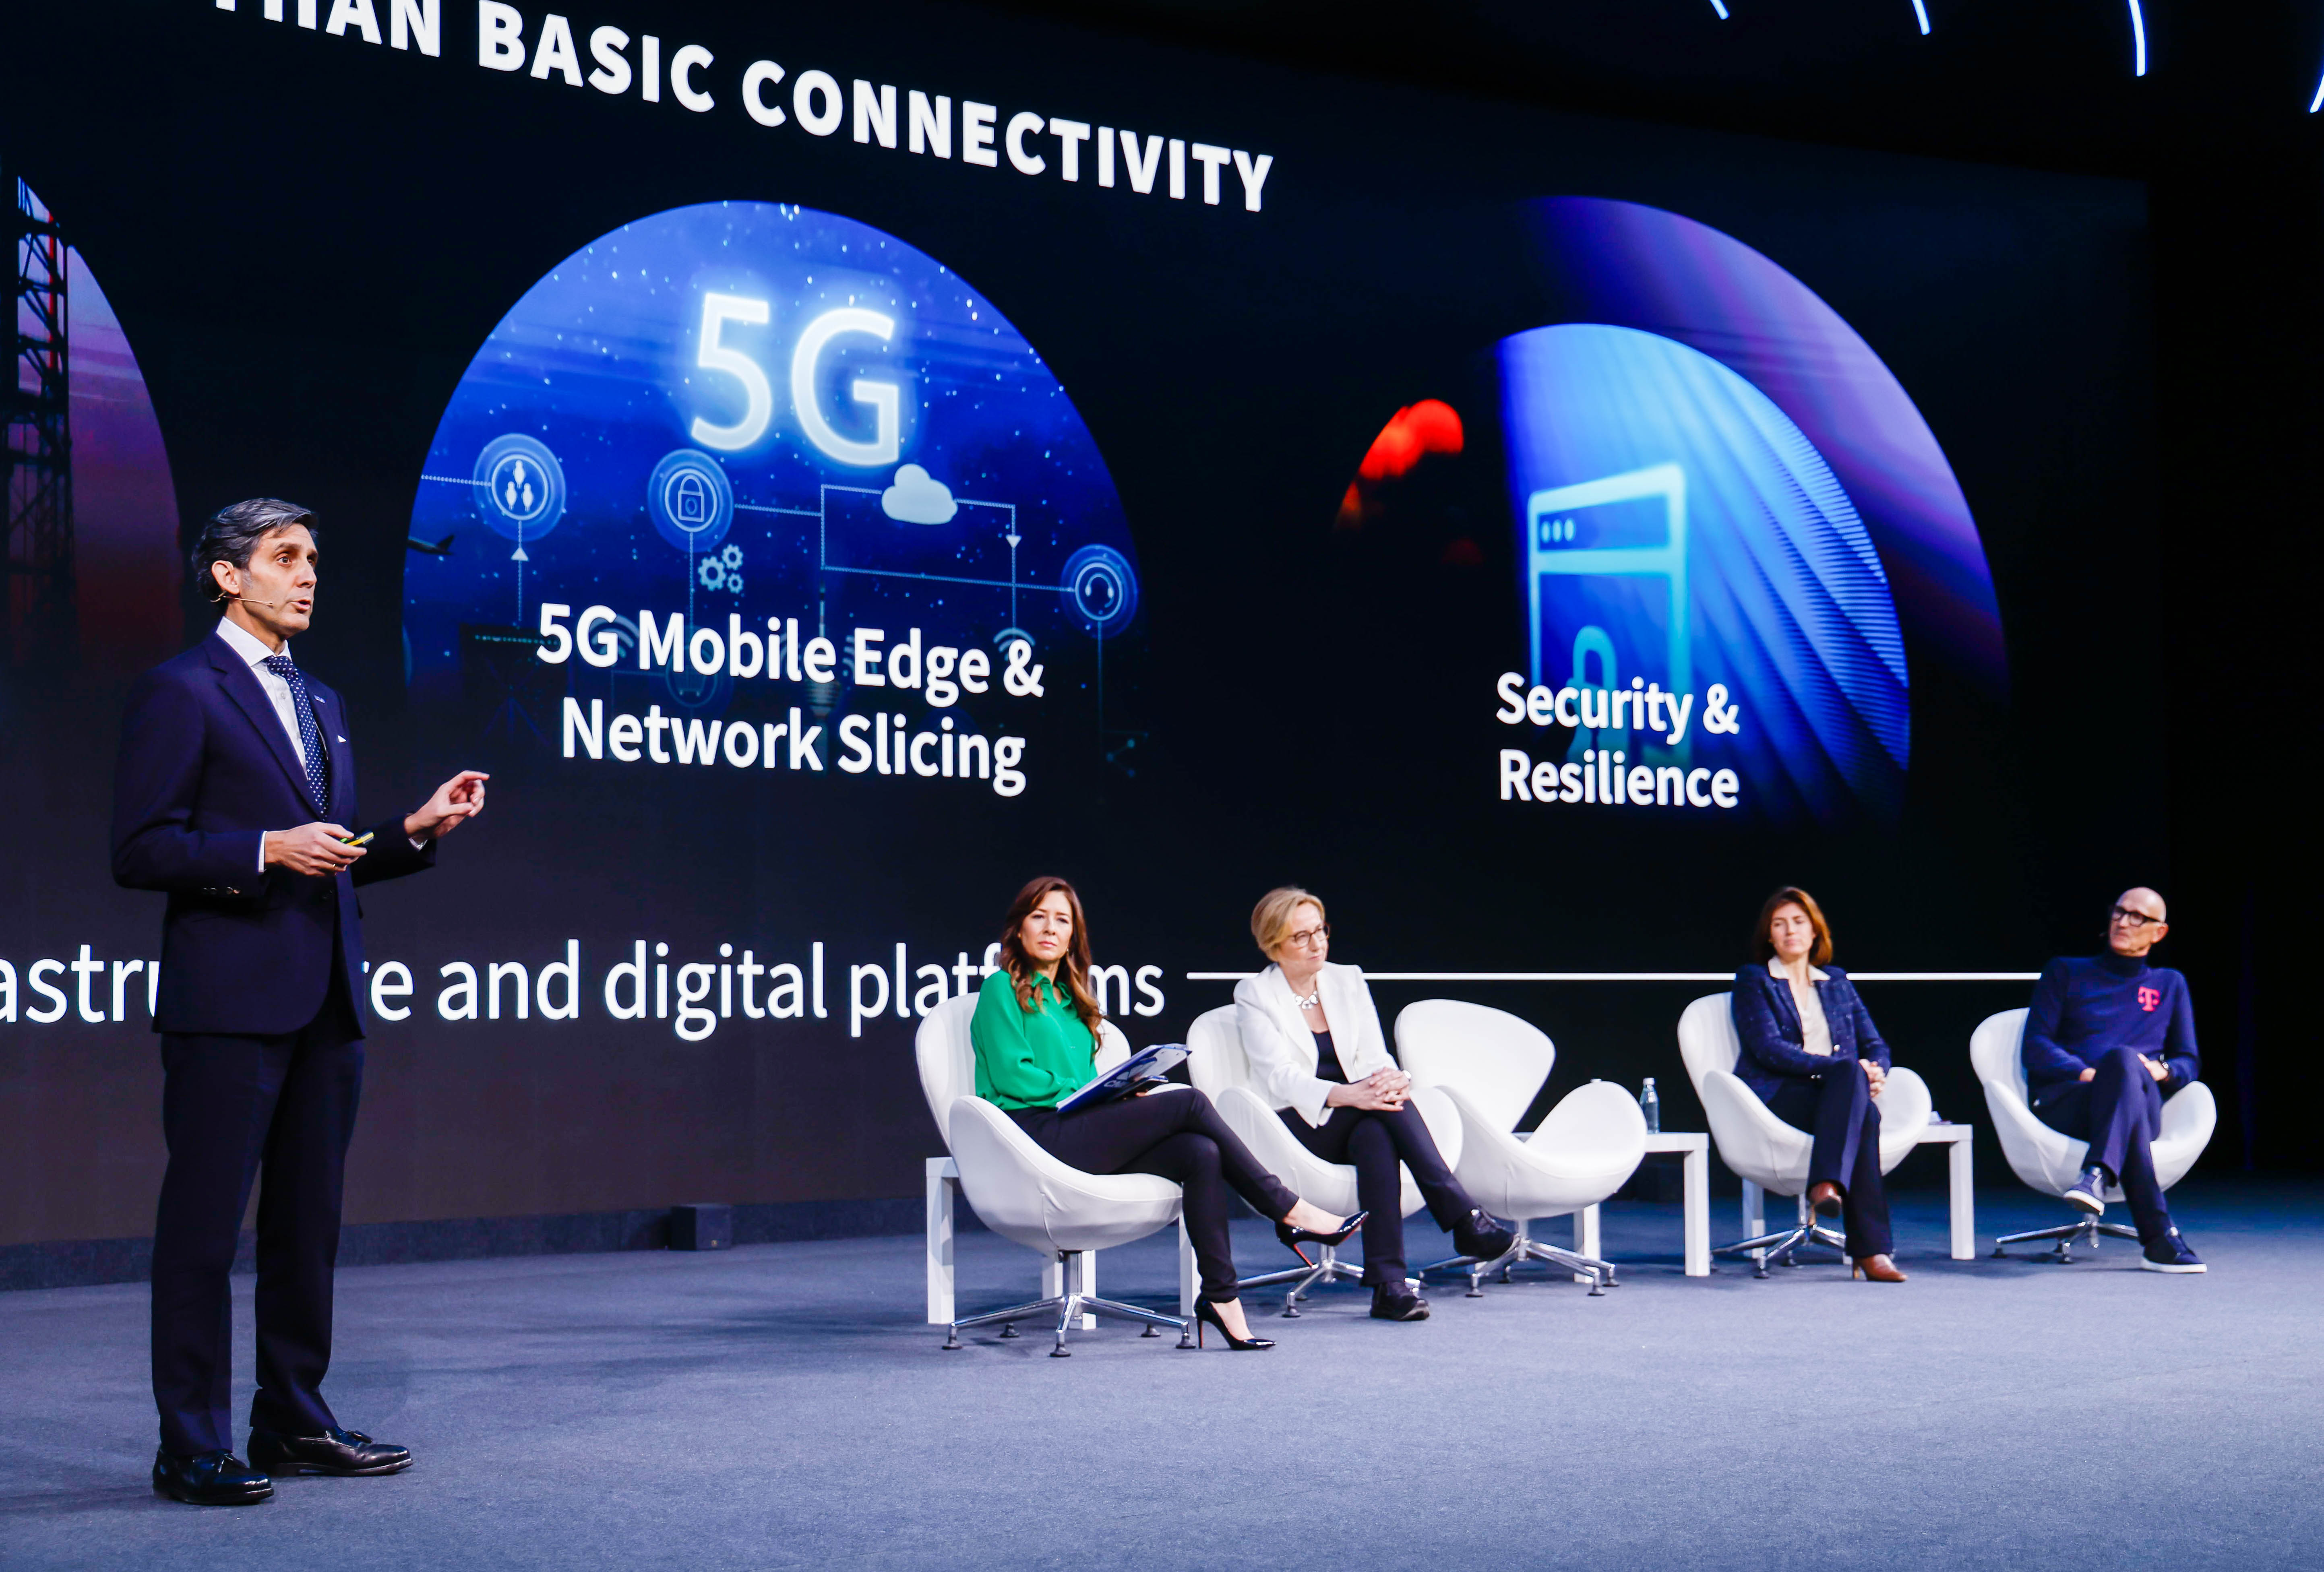 José María Álvarez-Pallete, Chairman of Telefónica and GSMA, took part in a roundtable with the CEOs of European operators to discuss the state of the sector, the future of connectivity in Europe and the Open Gateway initiative.